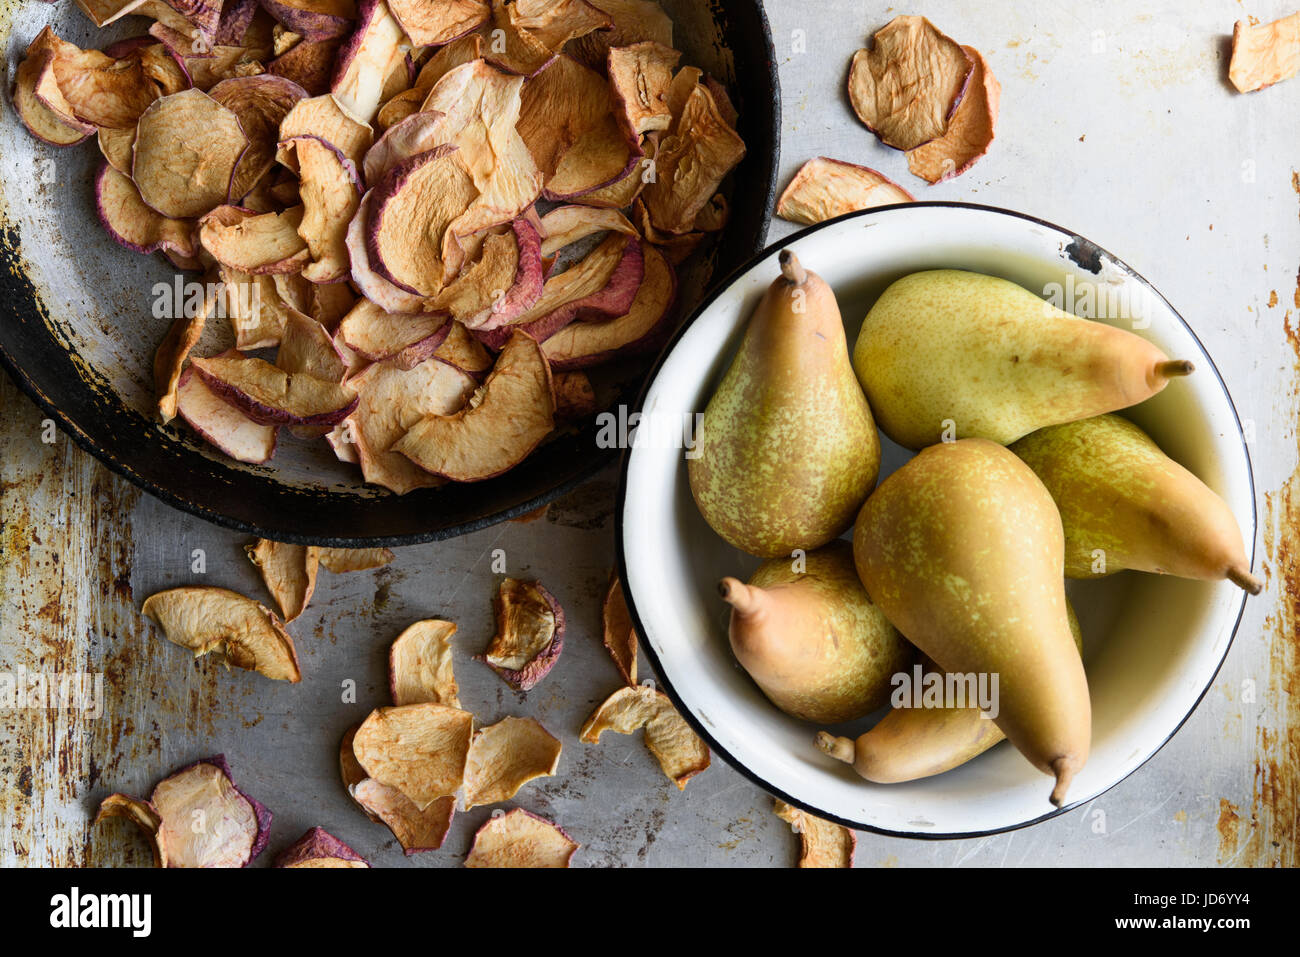 Top view: dried apples and pears in bowls. Rustic vintage style Stock Photo